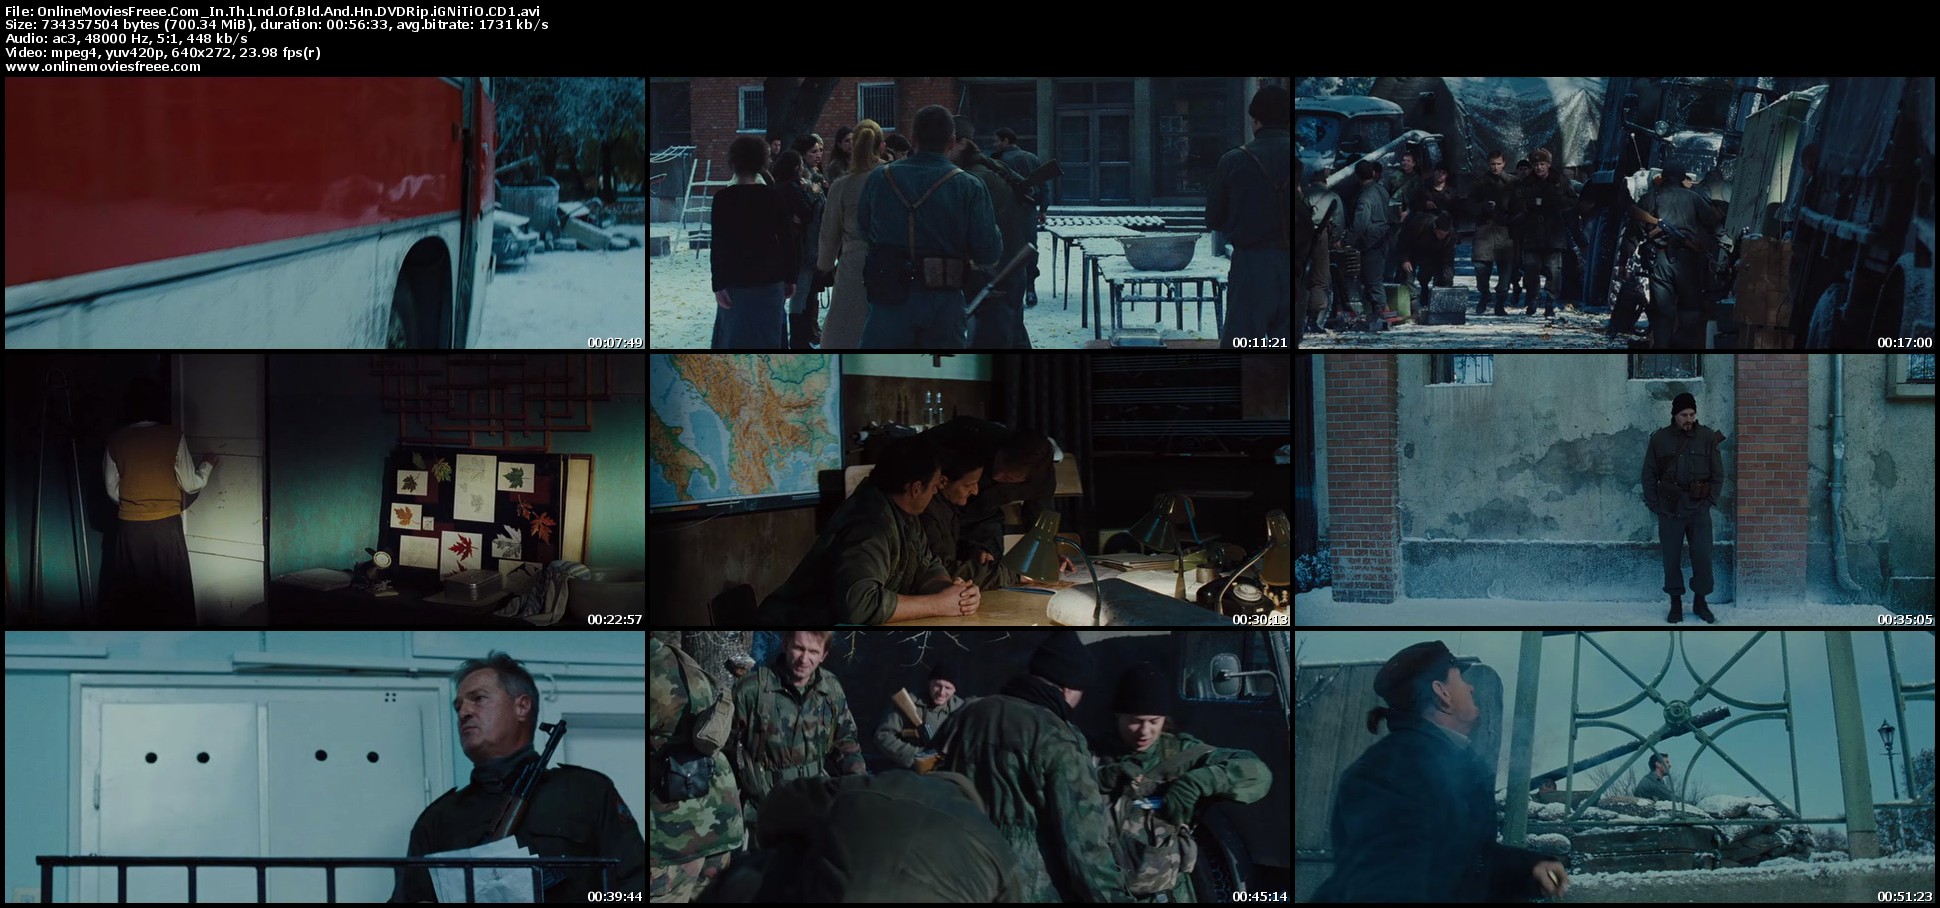 OnlineMoviesFreee.Com_In.Th.Lnd.Of.Bld.And.Hn.DVDRip.iGNiTiO.CD1_s.jpg